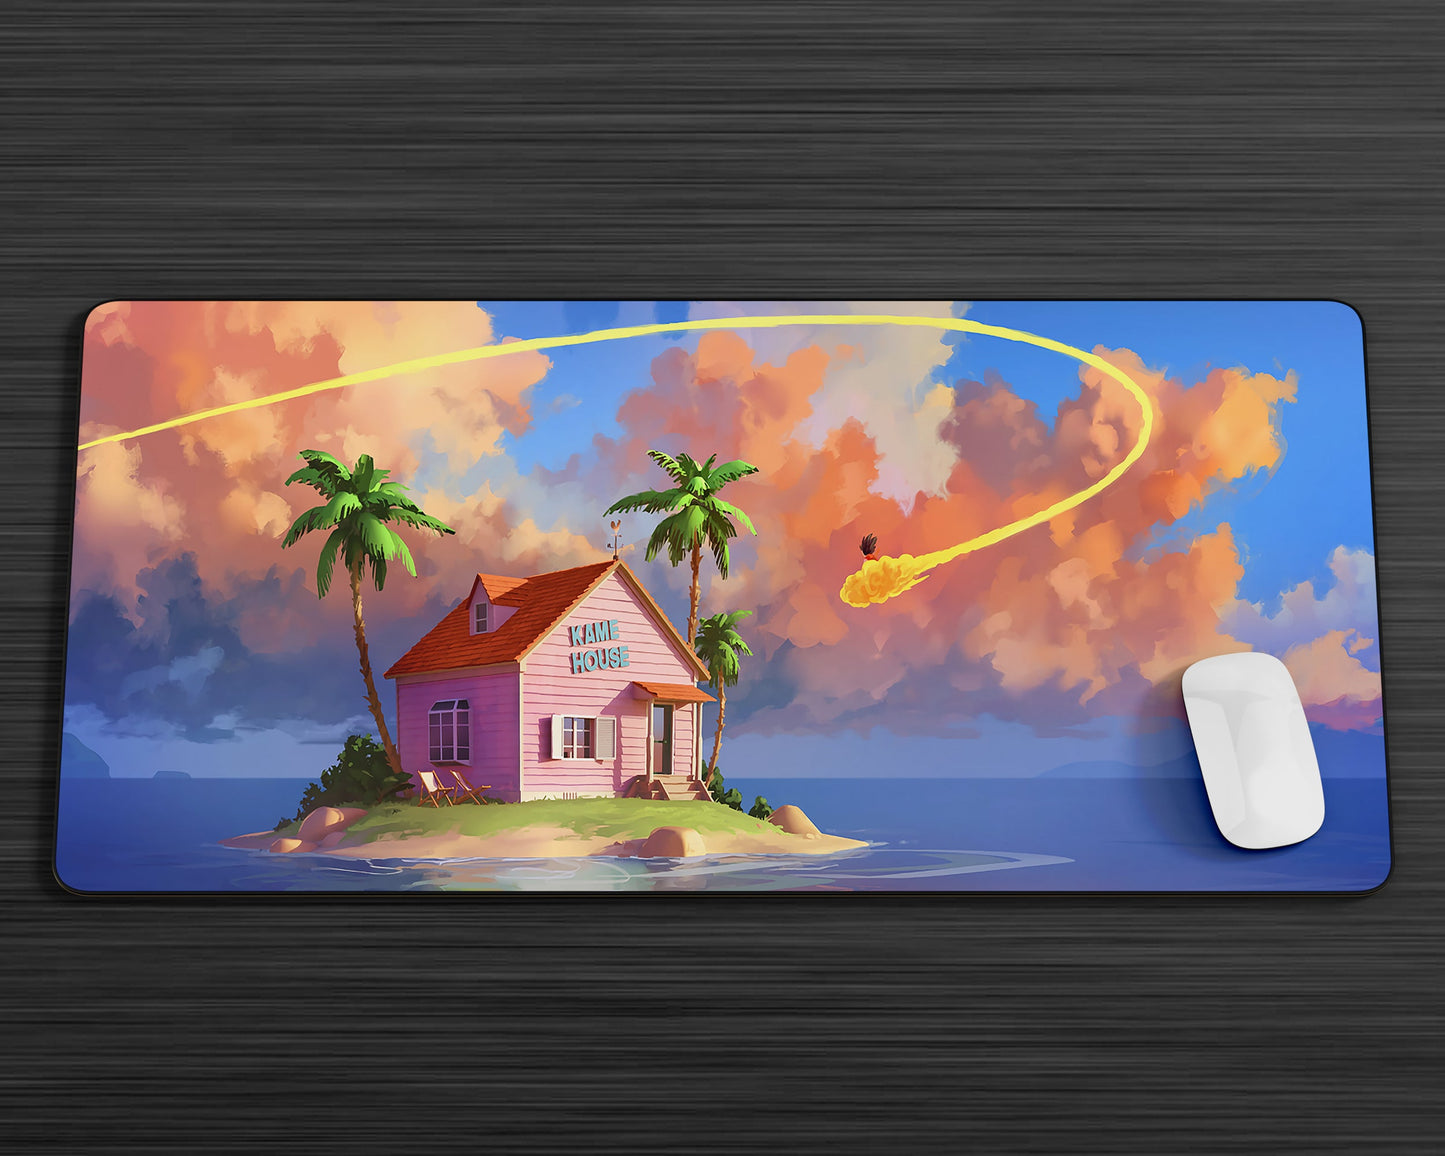 Anime Town Creations Mouse Pad Dragon Ball Kame House Gaming Mouse Pad Accessories - Anime Dragon Ball Gaming Mouse Pad